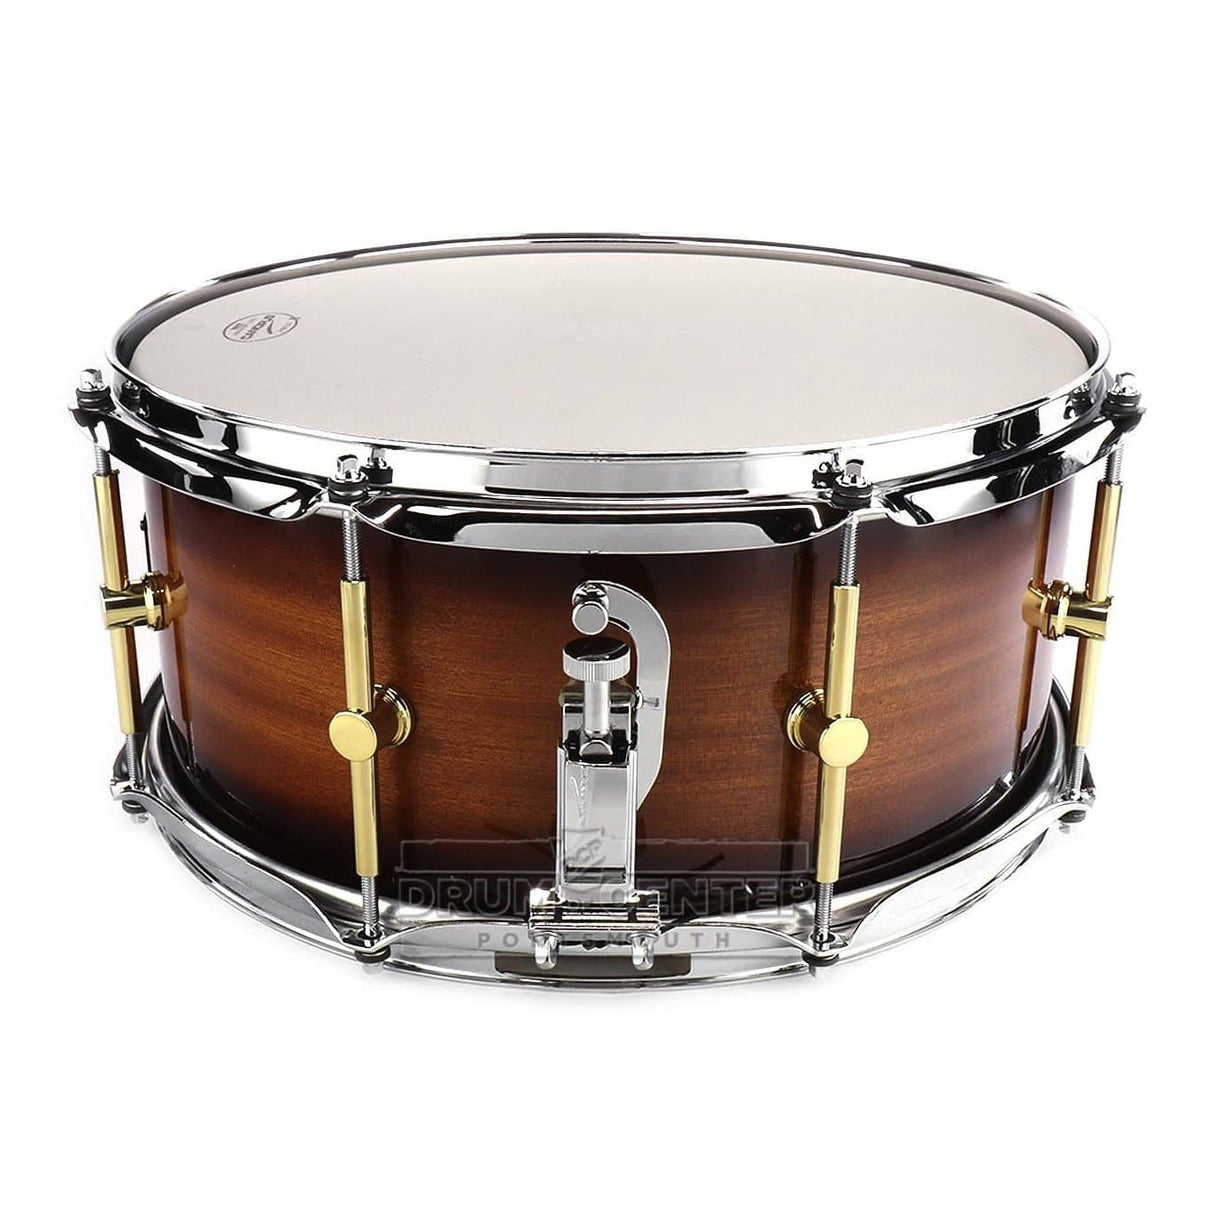 Canopus Mahogany Snare Drum 14x6.5 Brown Burst Lacquer